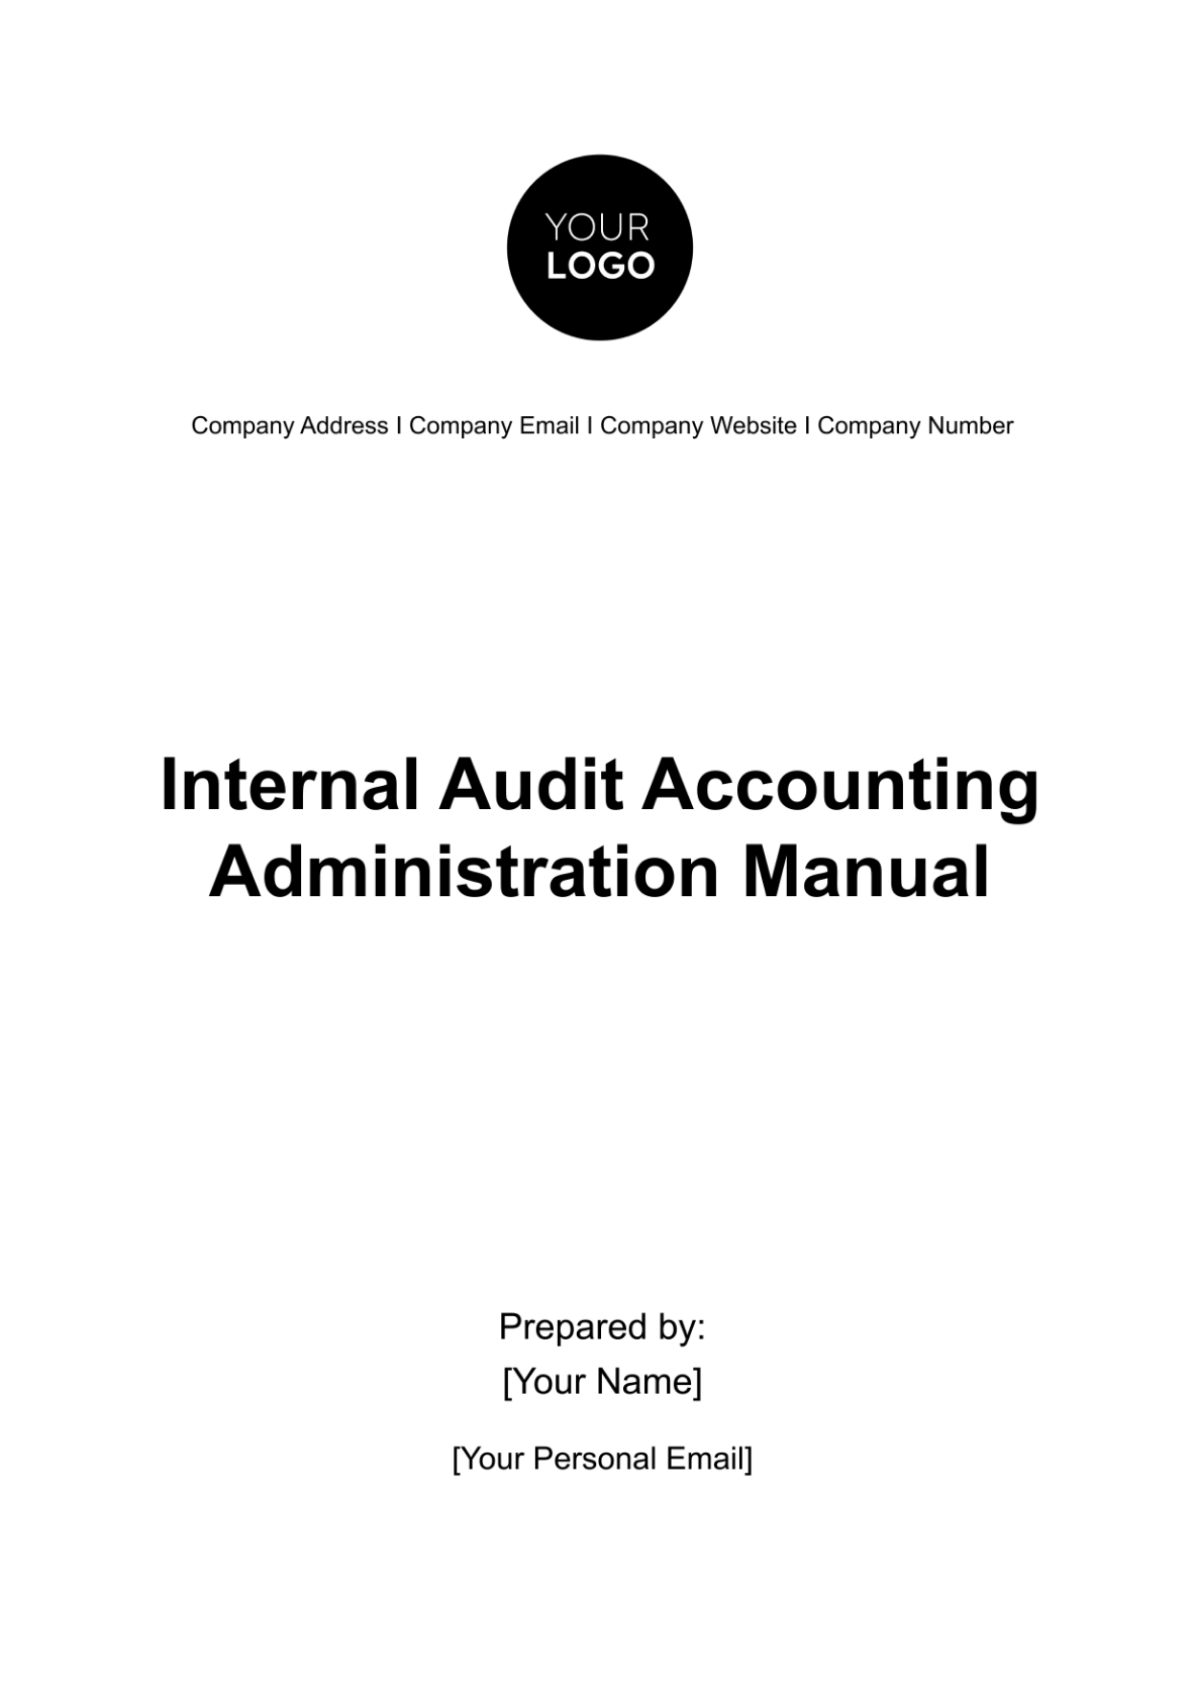 Free Internal Audit Accounting Administration Manual Template